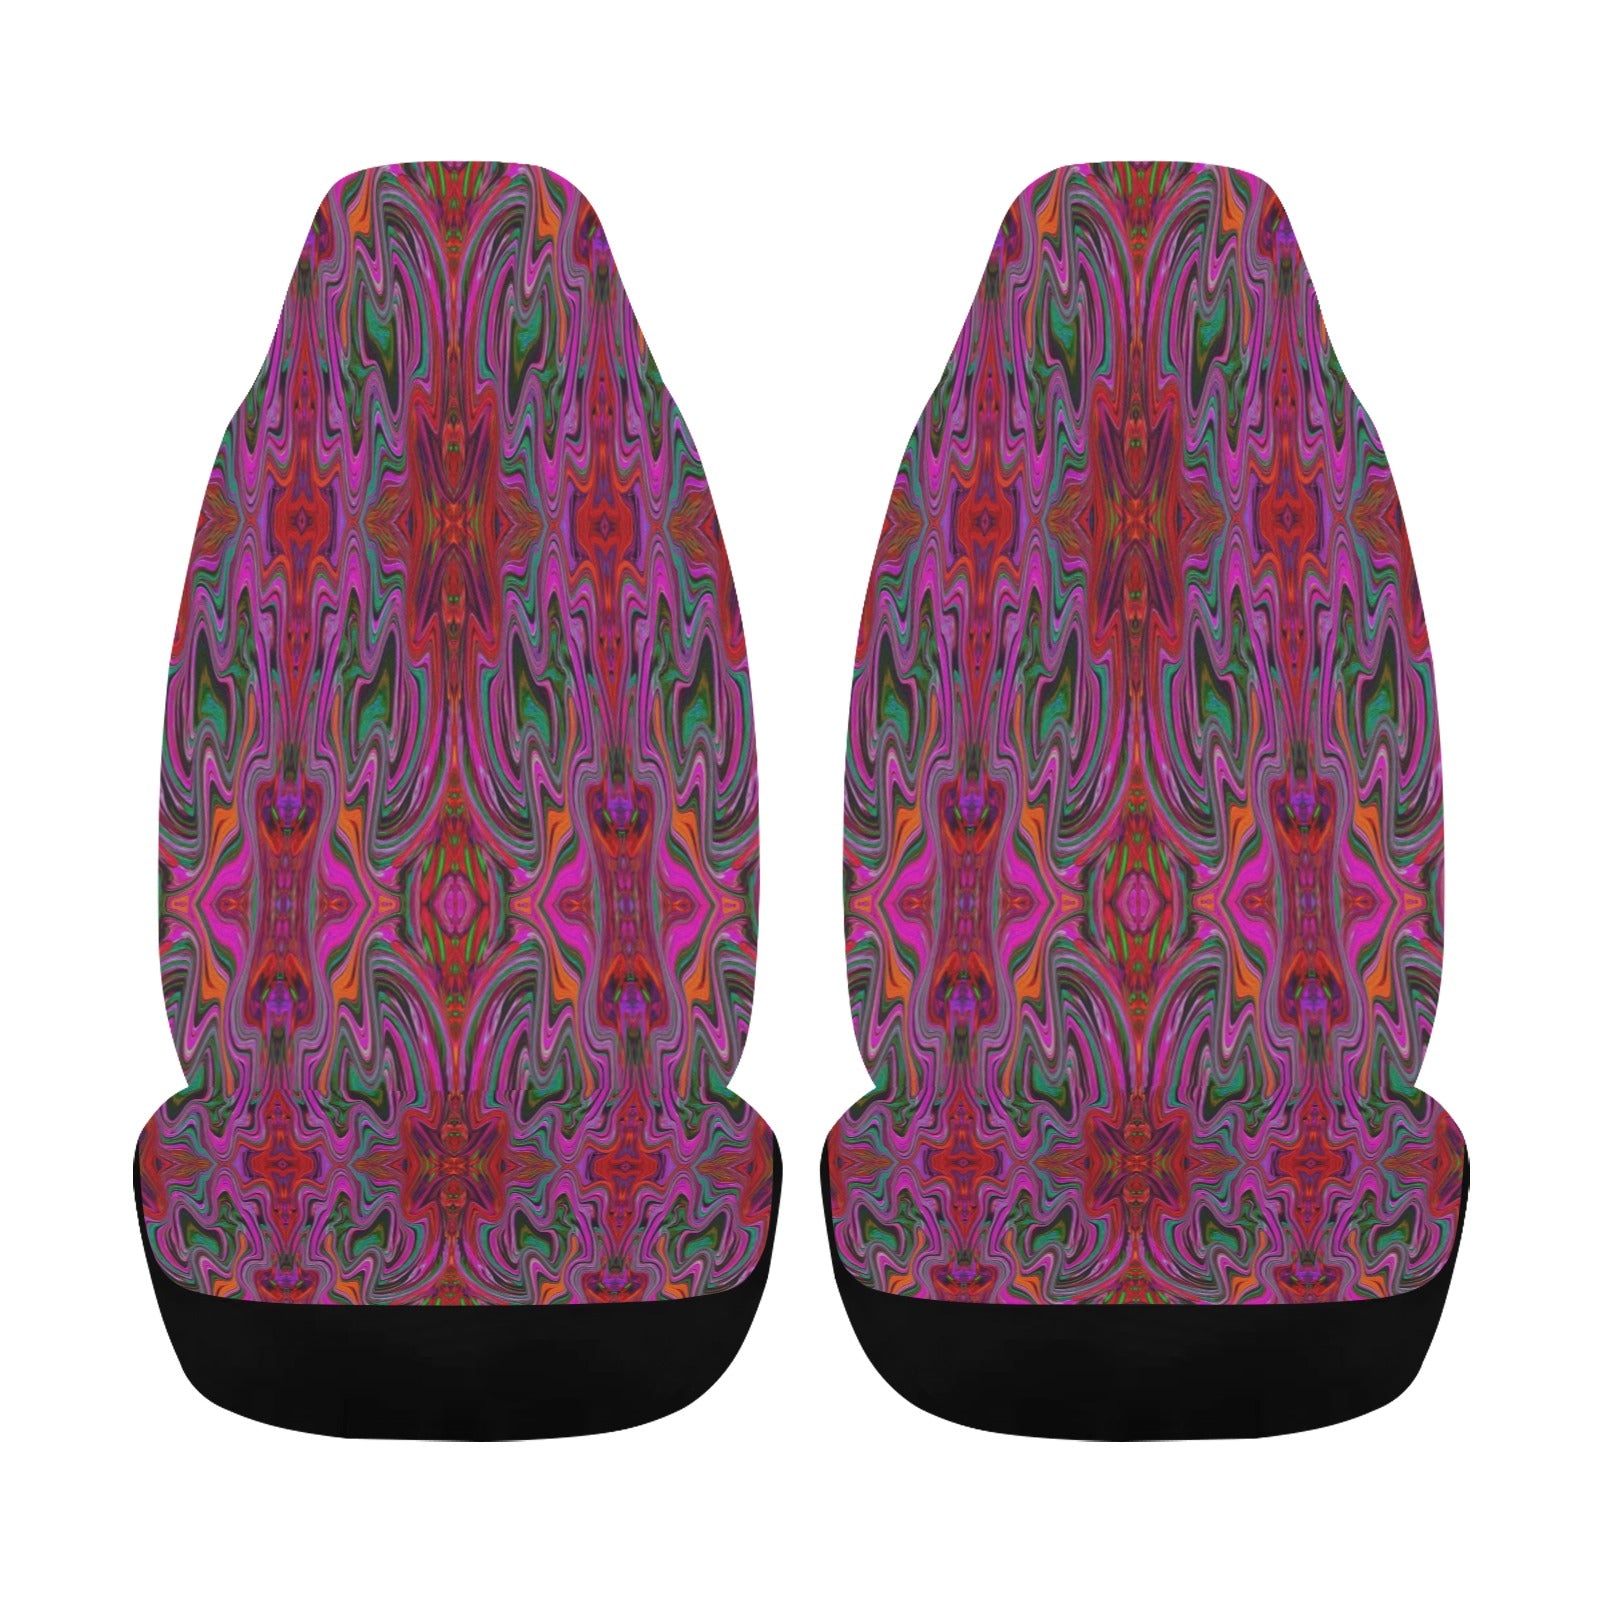 Car Seat Covers, Cool Trippy Magenta, Red and Green Wavy Pattern